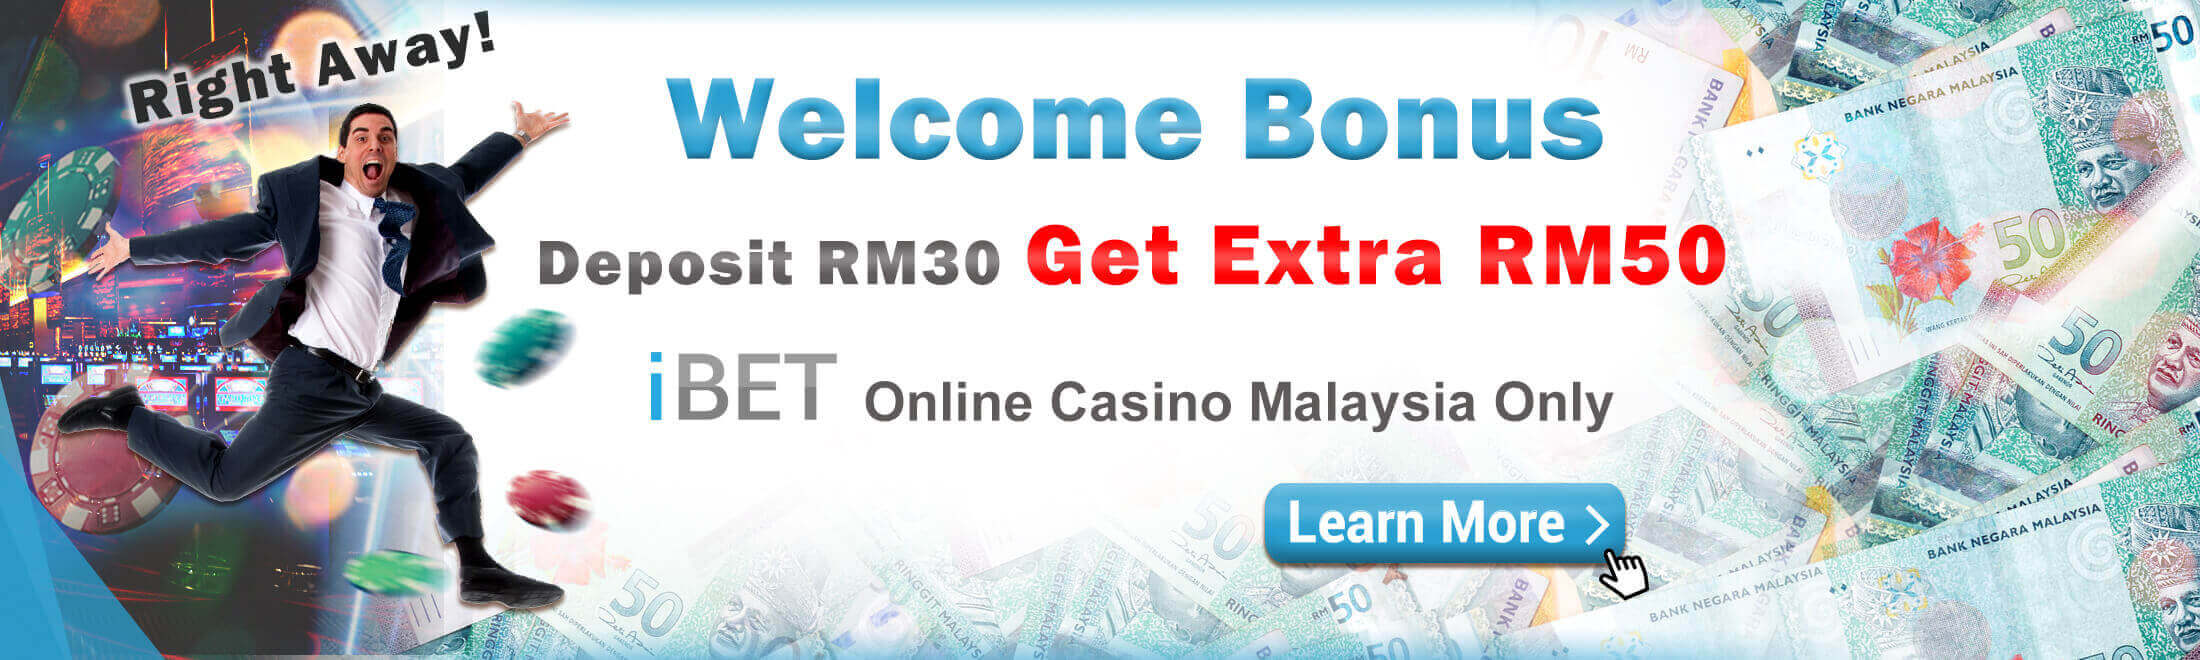 SCR888 Slot Game Deposit RM 30 Free RM 50 Promotion